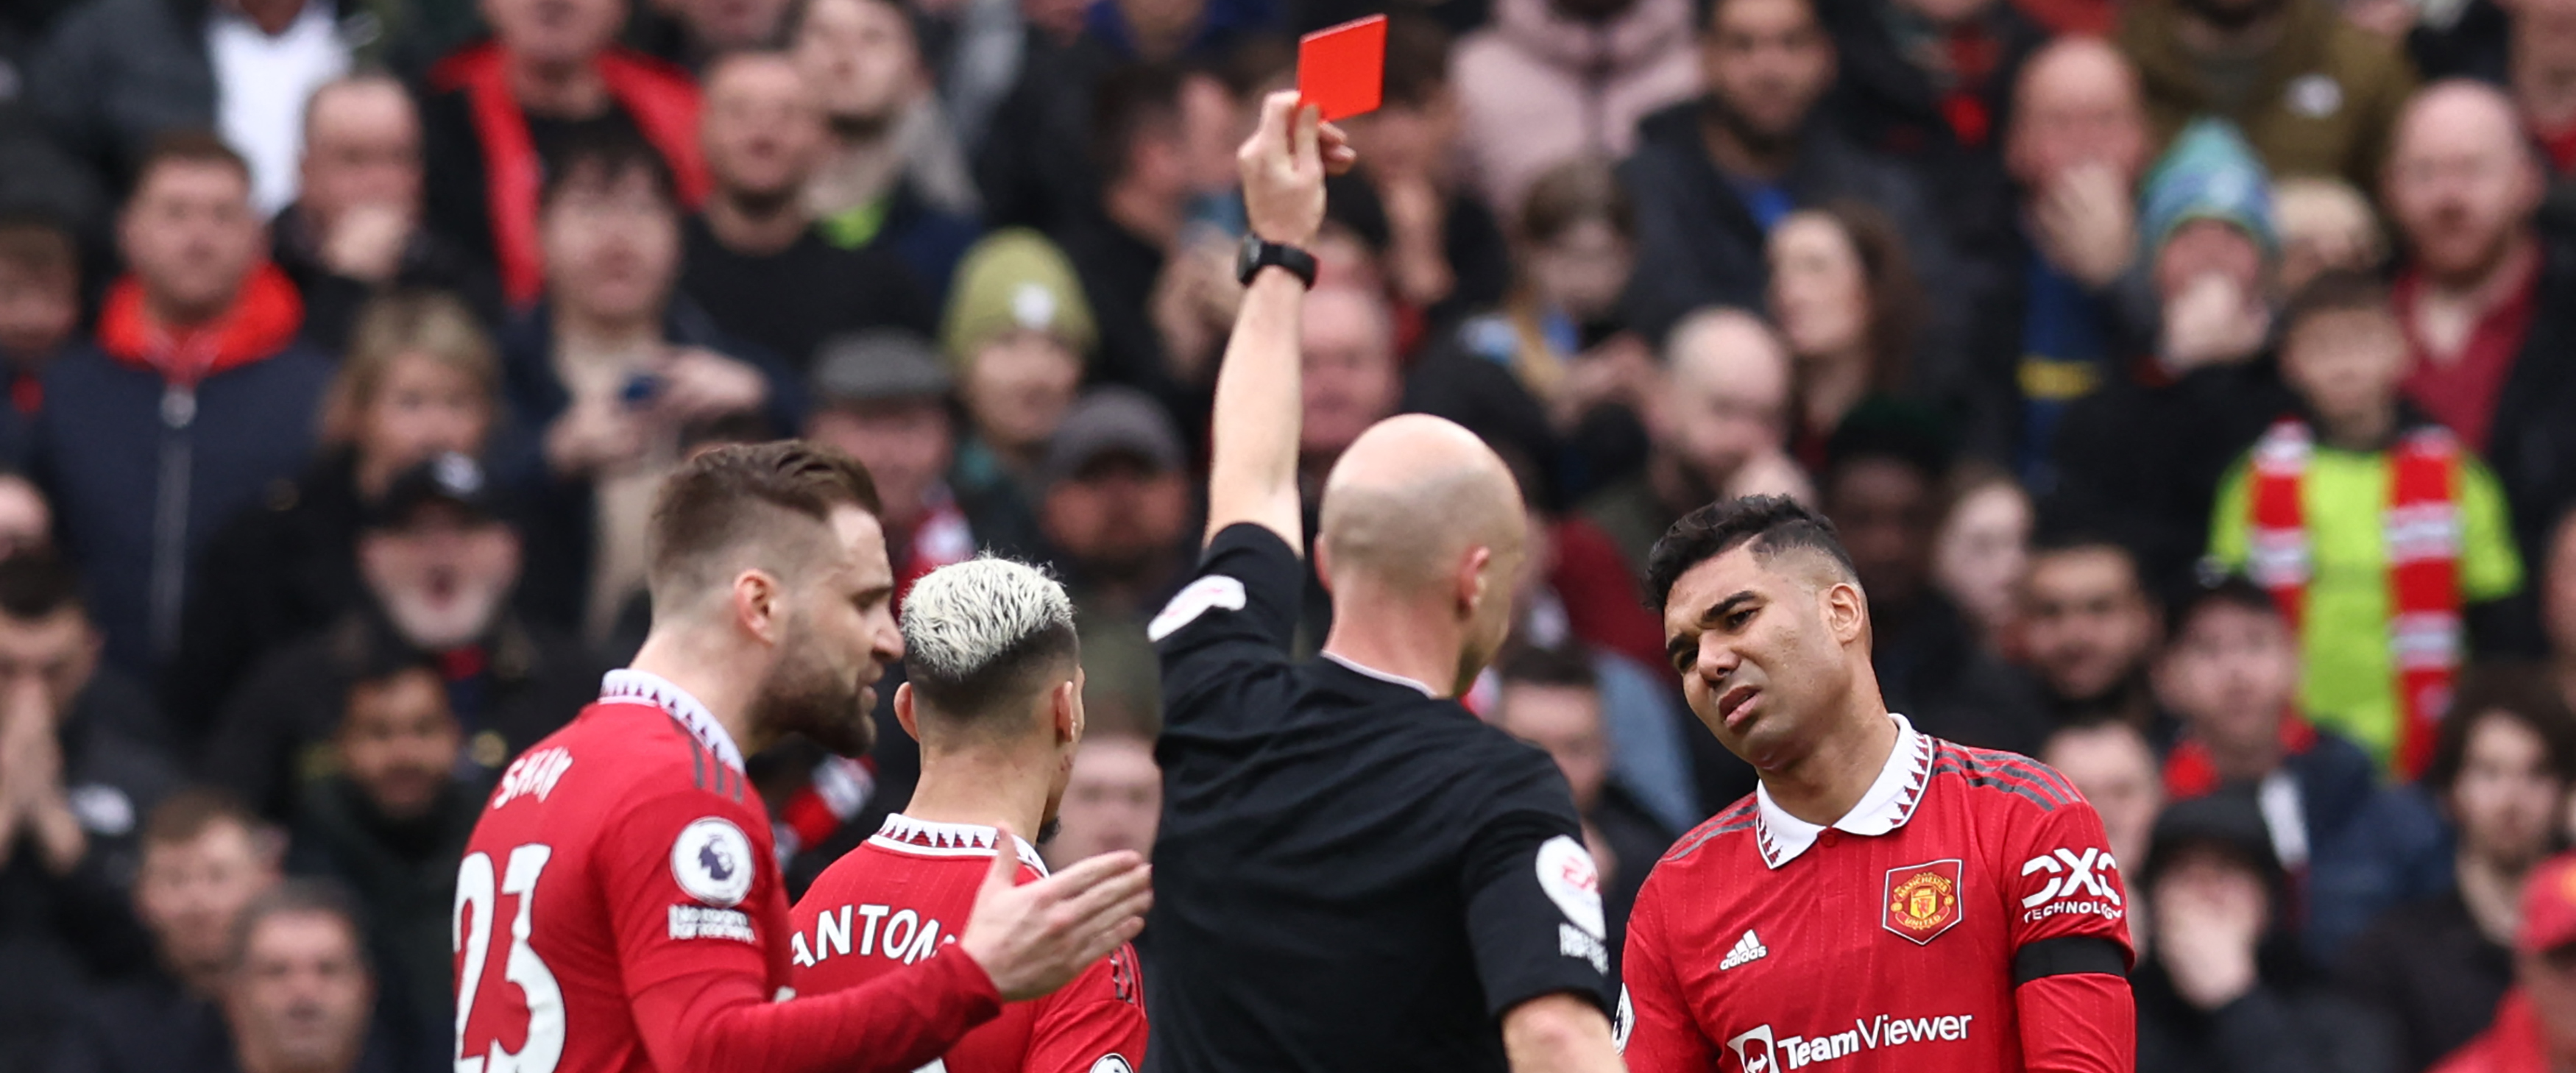 Premier League red cards are up four times compared to last season!